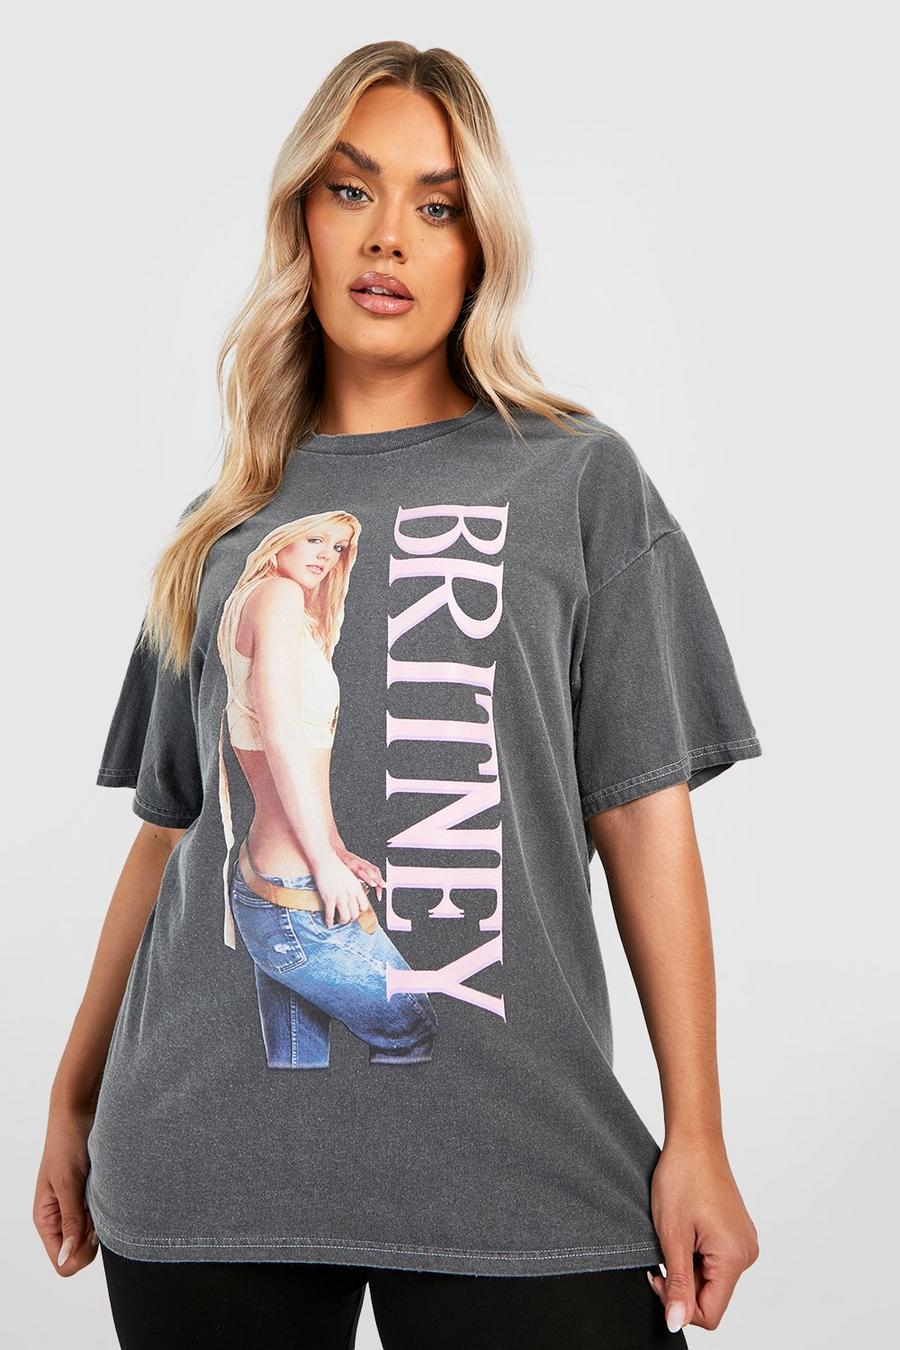 Charcoal grey Plus Britney Spears Licensed T-shirt